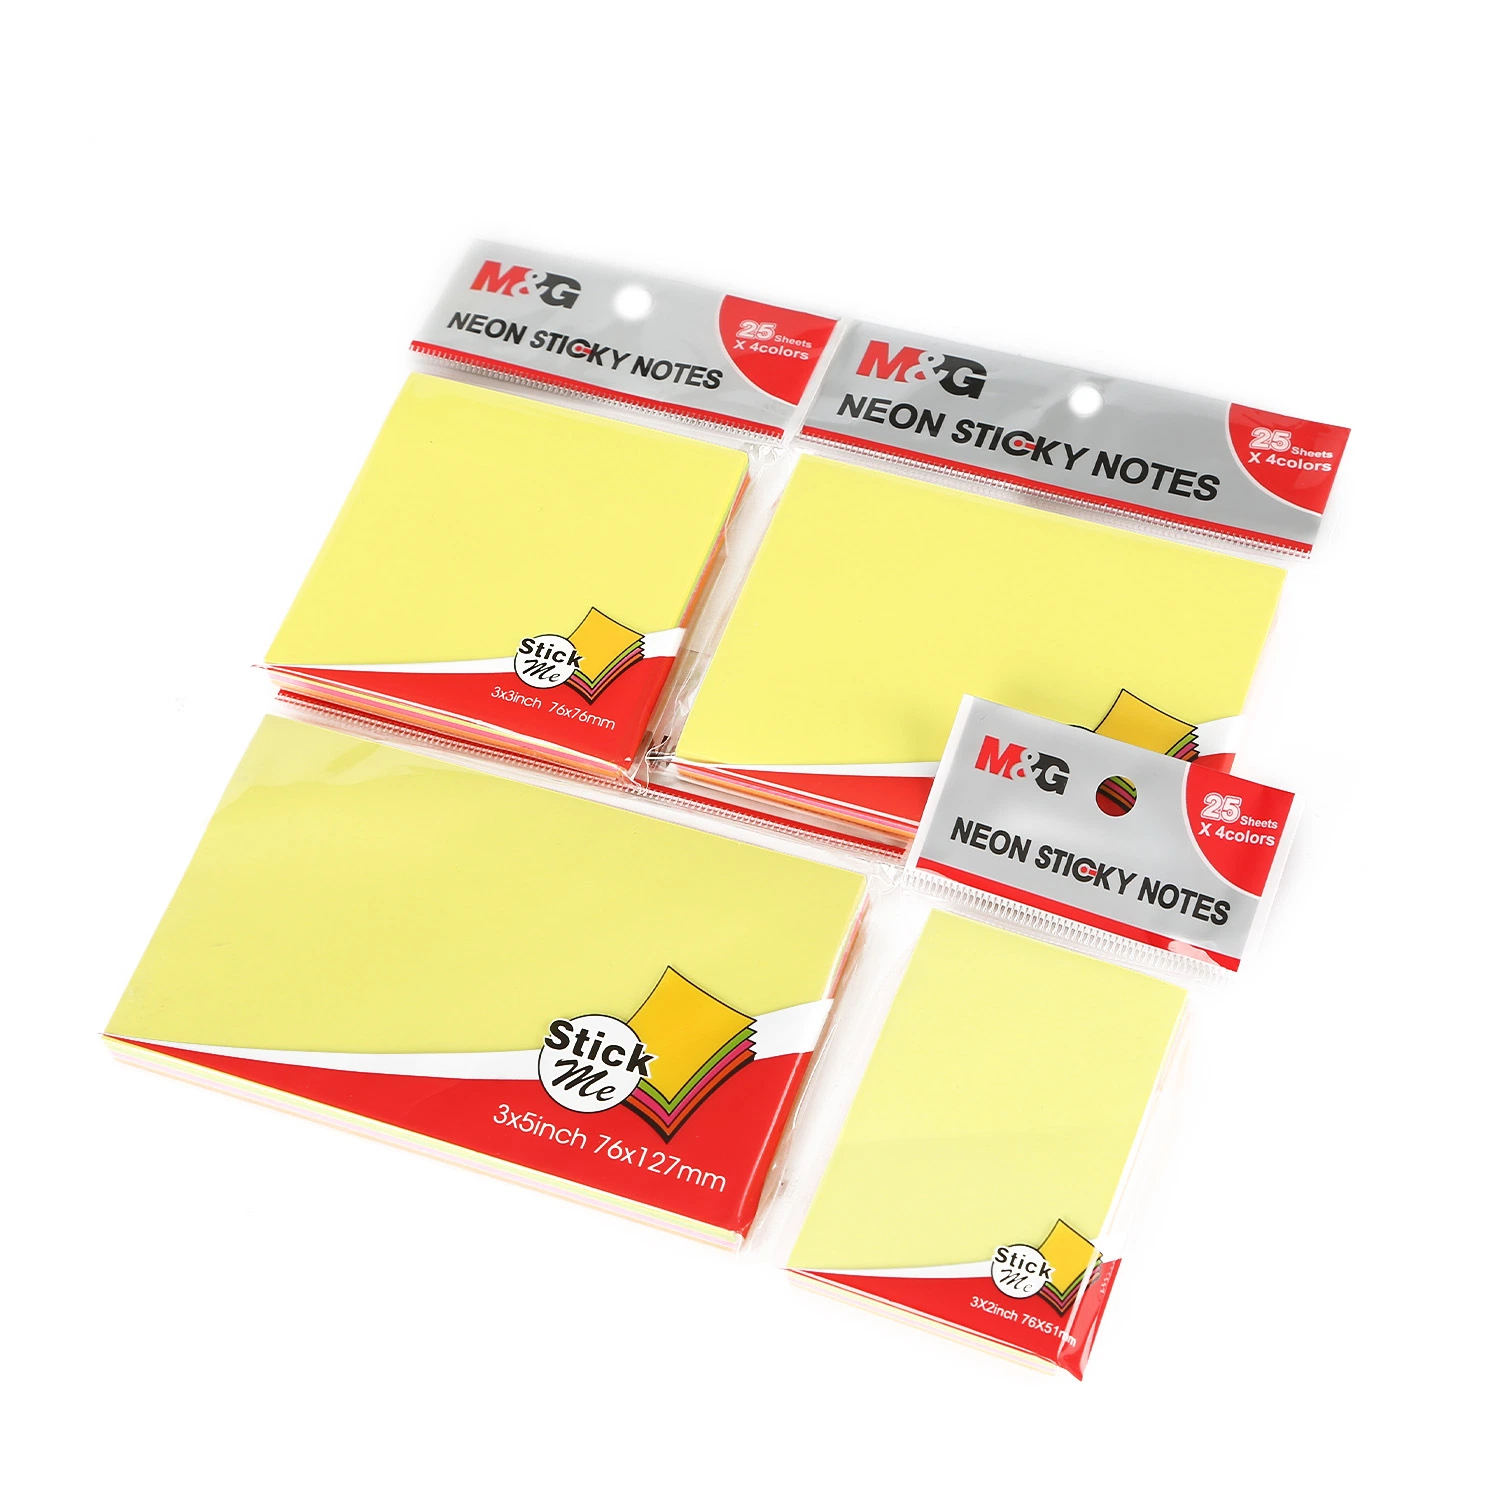 Personalized Stylish Gift 100 Sheets Sticky Notes Stationery Memo Pad